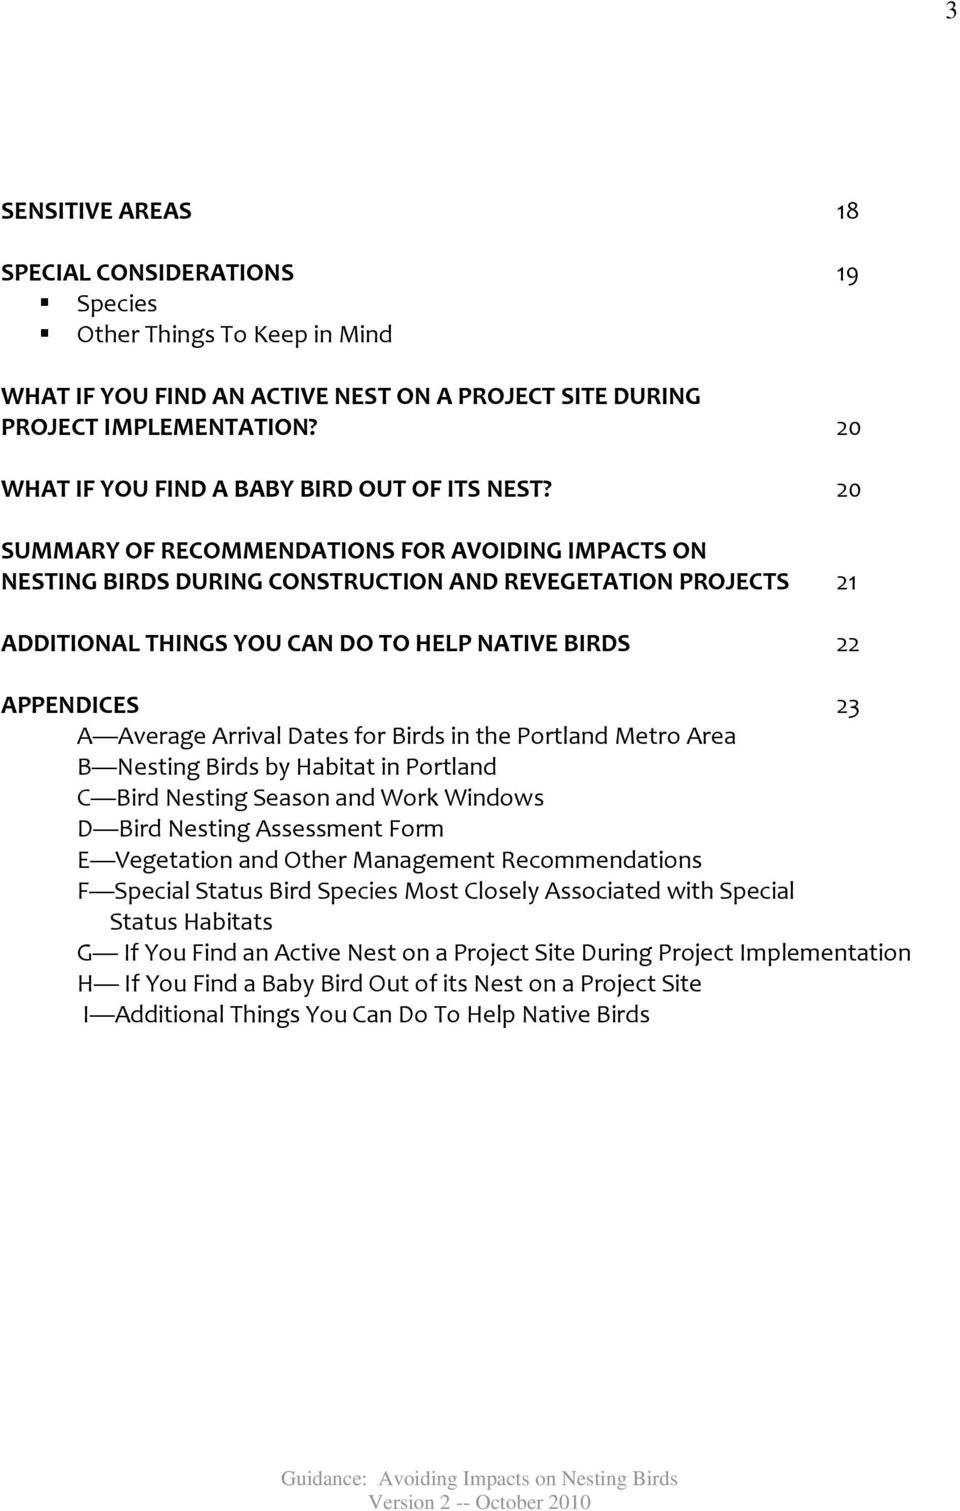 20 SUMMARY OF RECOMMENDATIONS FOR AVOIDING IMPACTS ON NESTING BIRDS DURING CONSTRUCTION AND REVEGETATION PROJECTS 21 ADDITIONAL THINGS YOU CAN DO TO HELP NATIVE BIRDS 22 APPENDICES 23 A Average